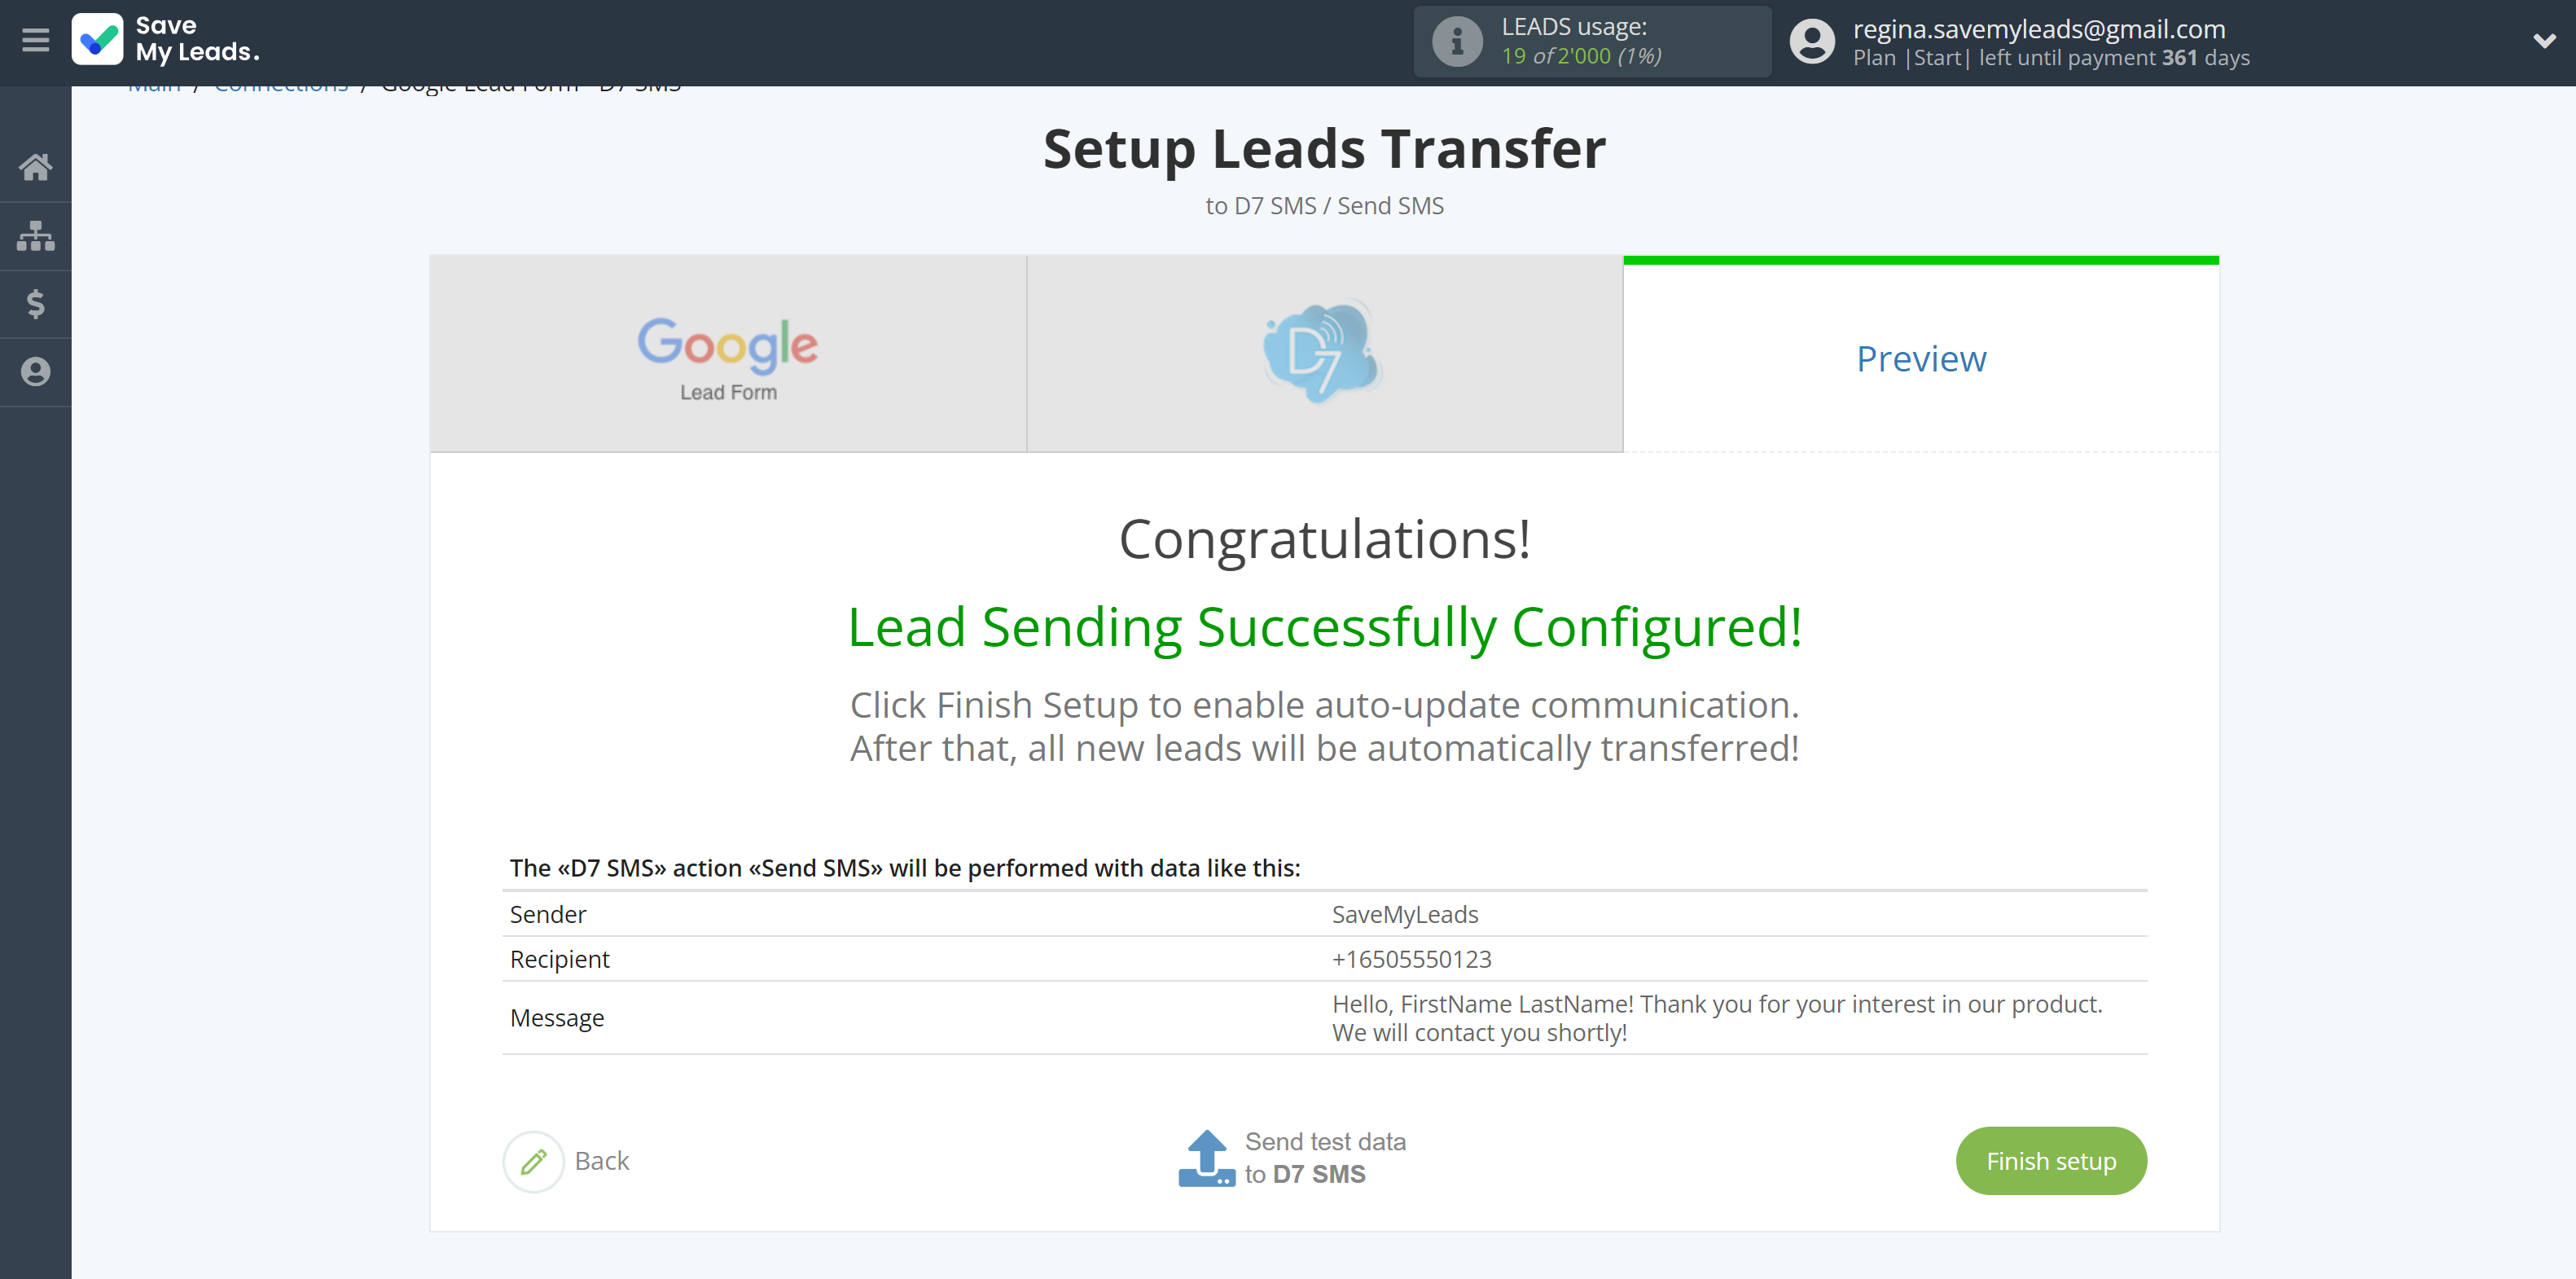 How to Connect Google Lead Form with D7 SMS | Test data